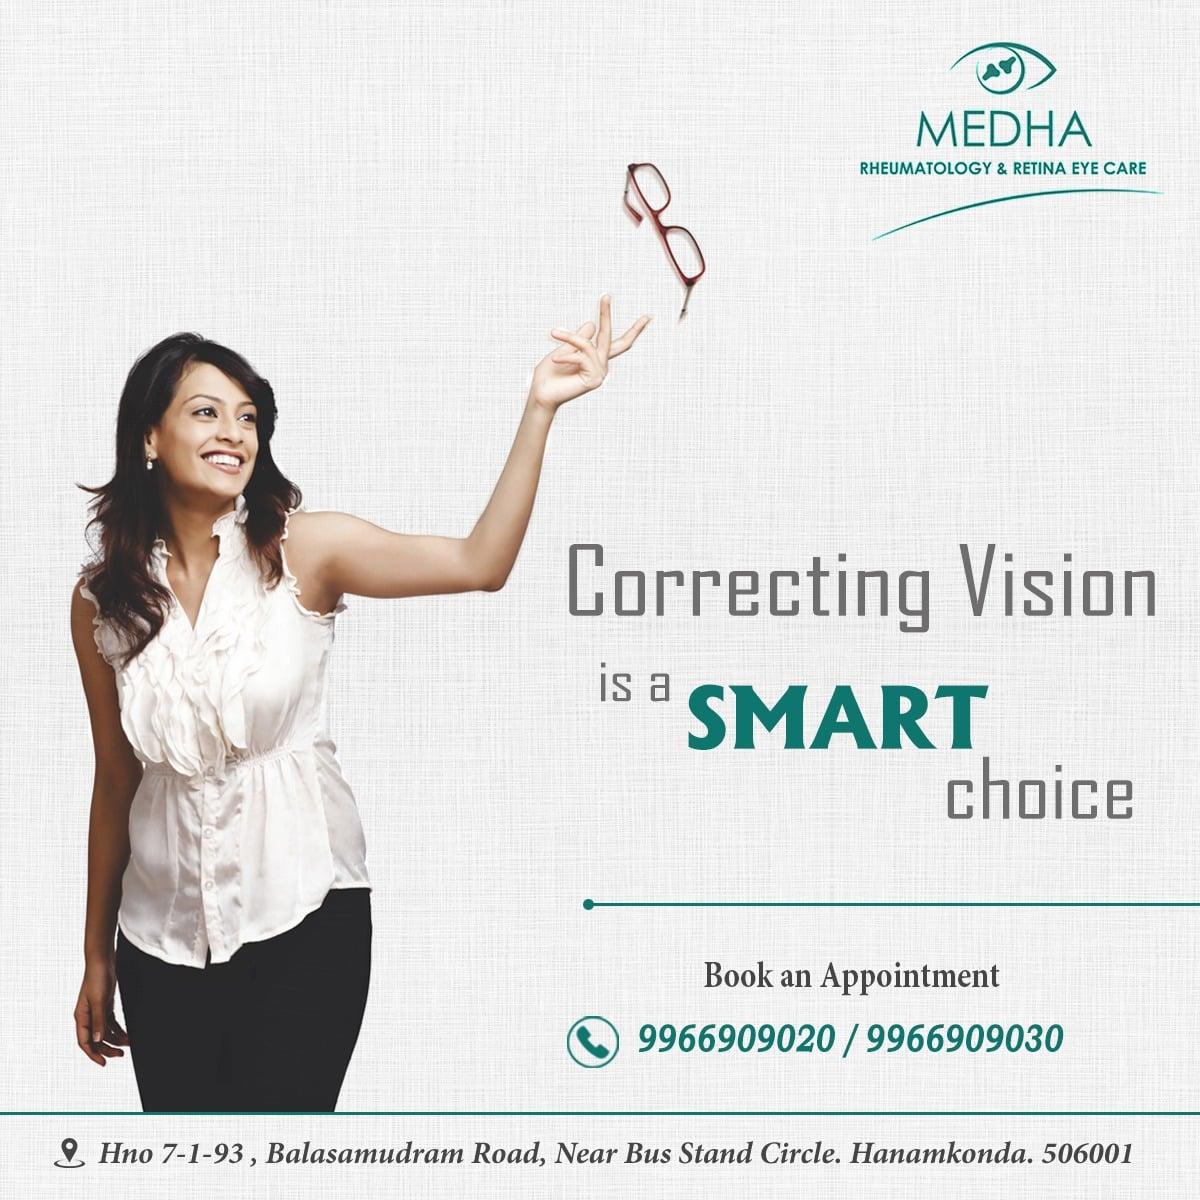 Correcting Vision is a Smart Choice!